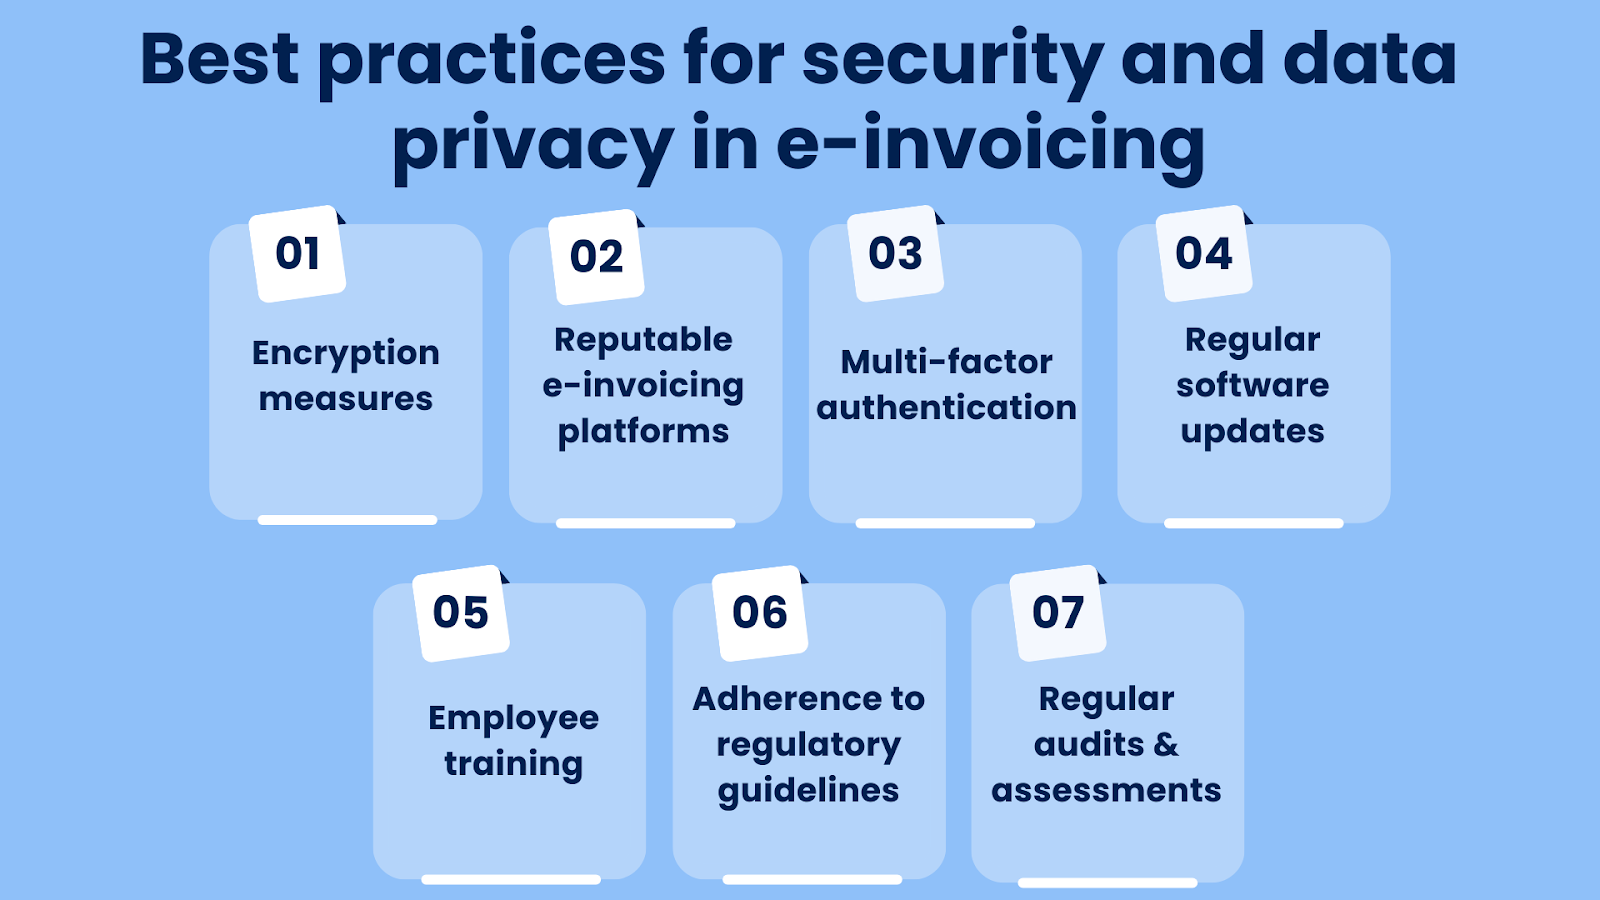 Best practices for security and data privacy in e-invoicing